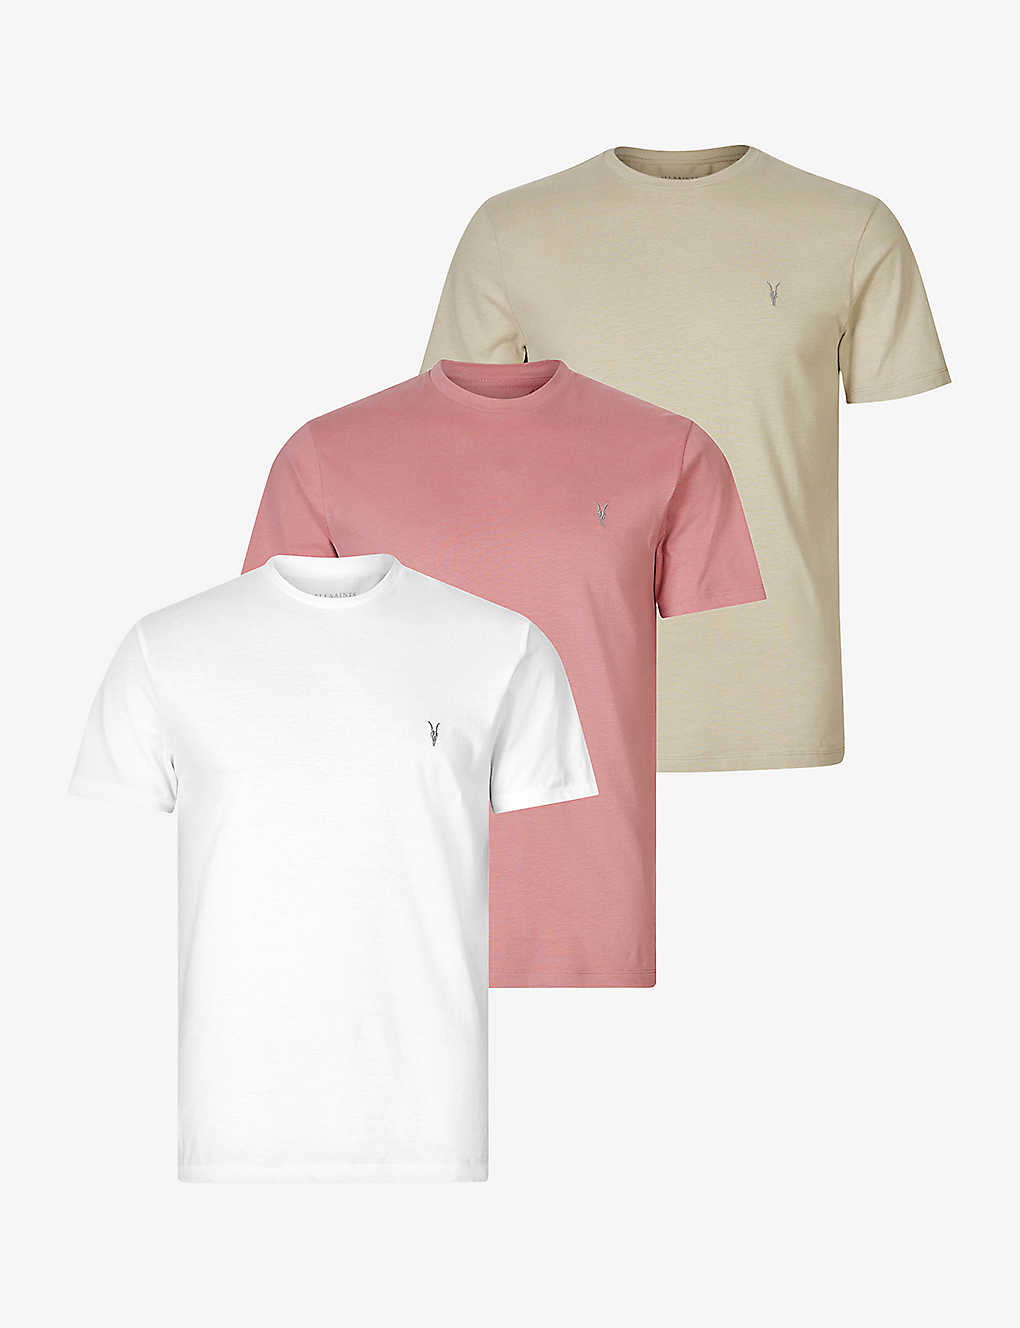 Allsaints Brace Tonic Pack Of Three Cotton-jersey T-shirts In Green/pink/opt